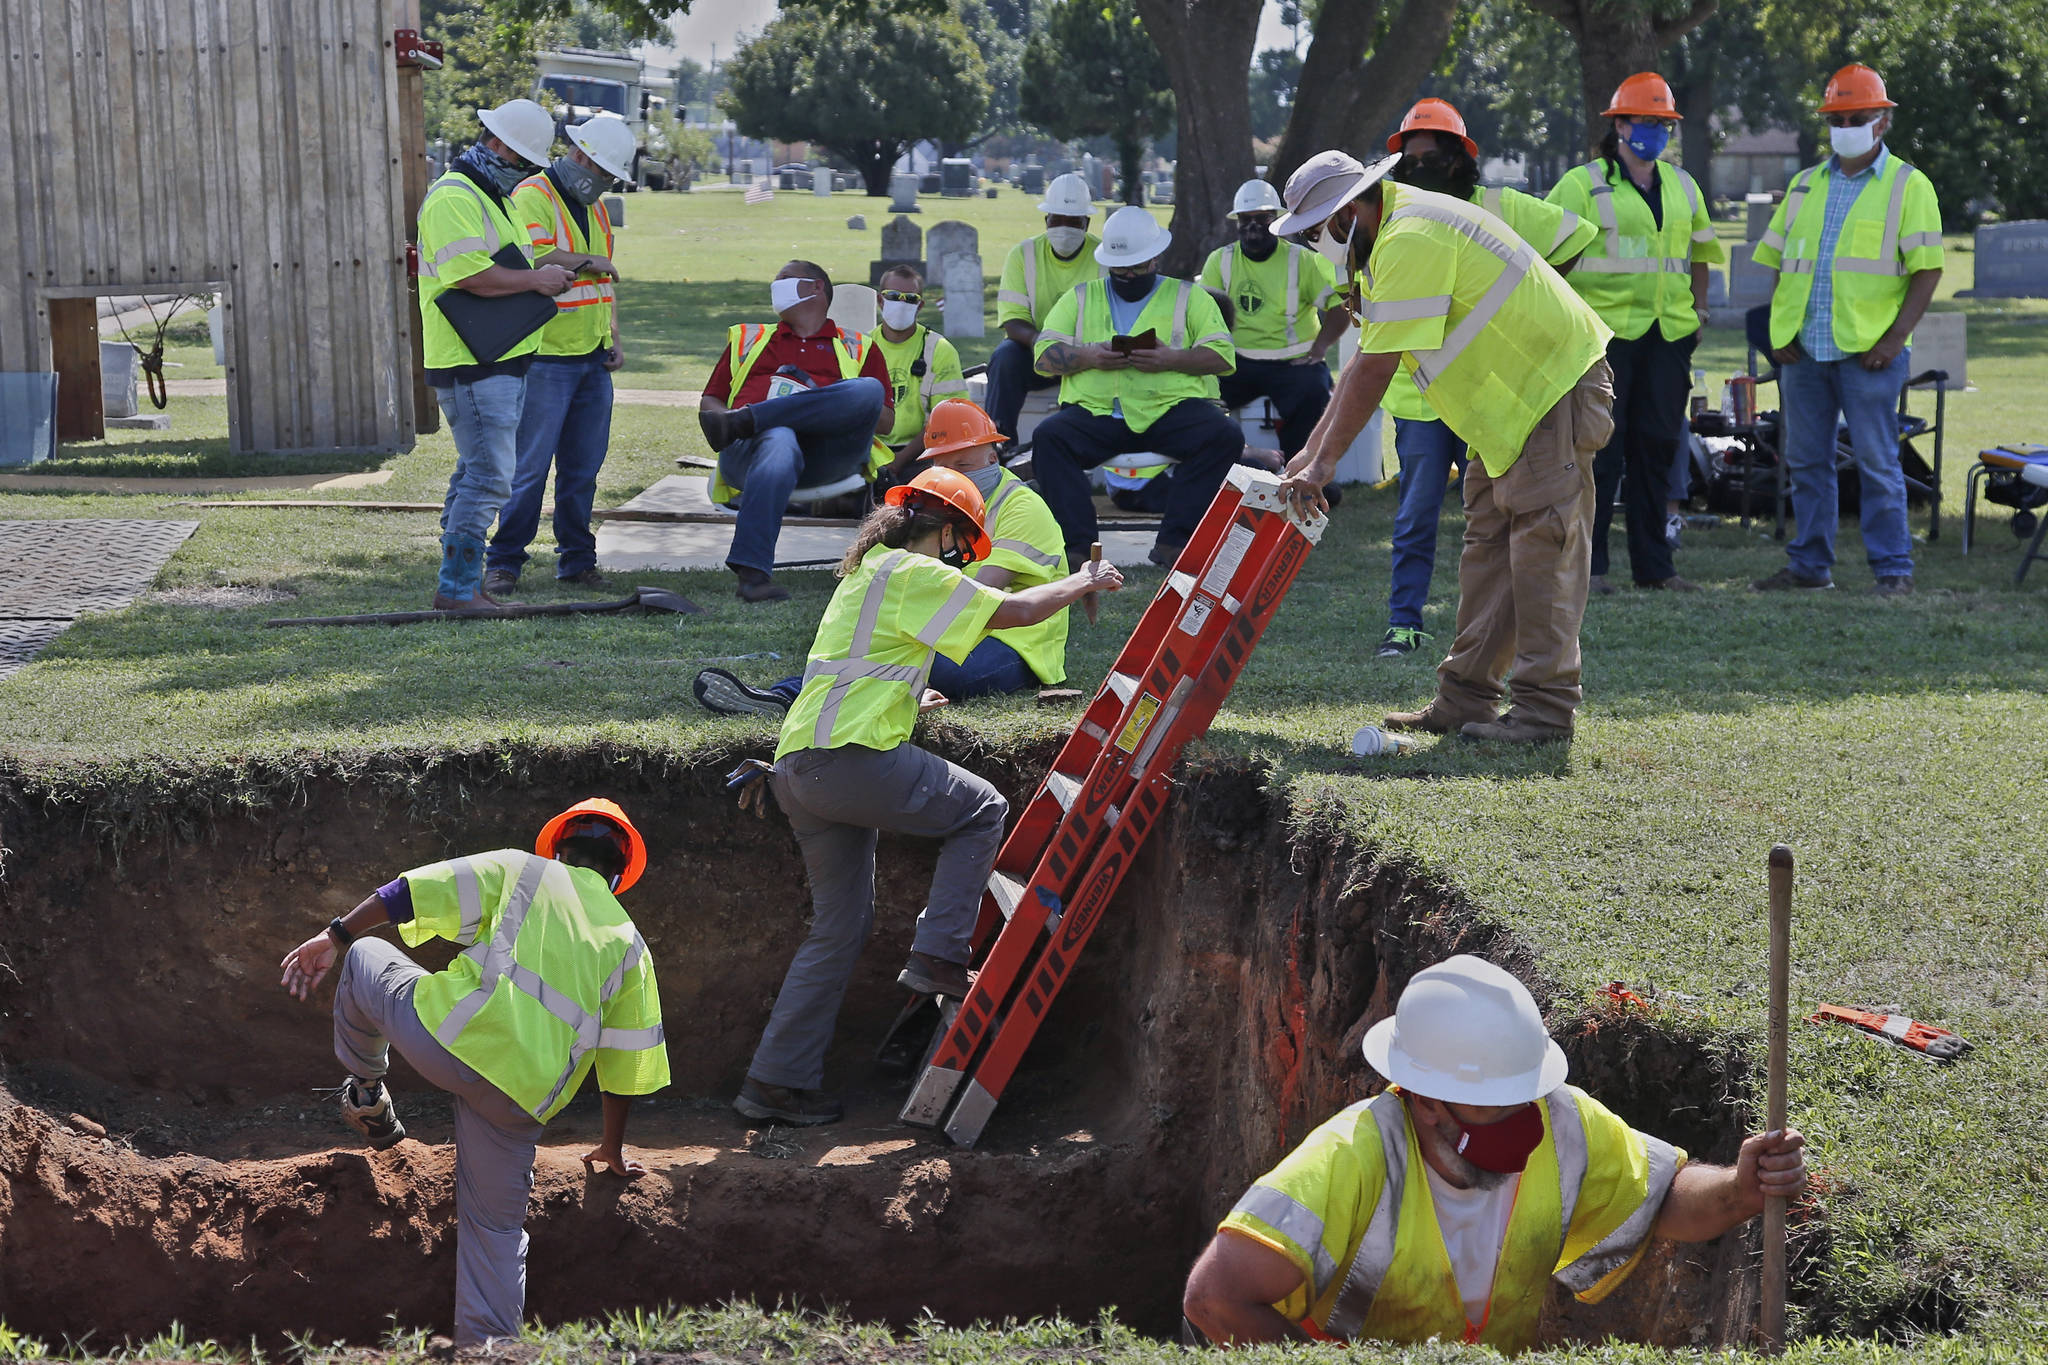 FILE - In this July 14, 2020, file photo, workers climb out of the excavation site as work continues on a potential unmarked mass grave from the 1921 Tulsa Race Massacre, at Oaklawn Cemetery in Tulsa, Okla. A second excavation begins Monday, Oct. 19, 2020, at a cemetery in an effort to find and identify victims of the 1921 Tulsa Race Massacre and shed light on violence that left hundreds dead and decimated an area that was once a cultural and economic mecca for African Americans. (AP Photo/Sue Ogrocki File)